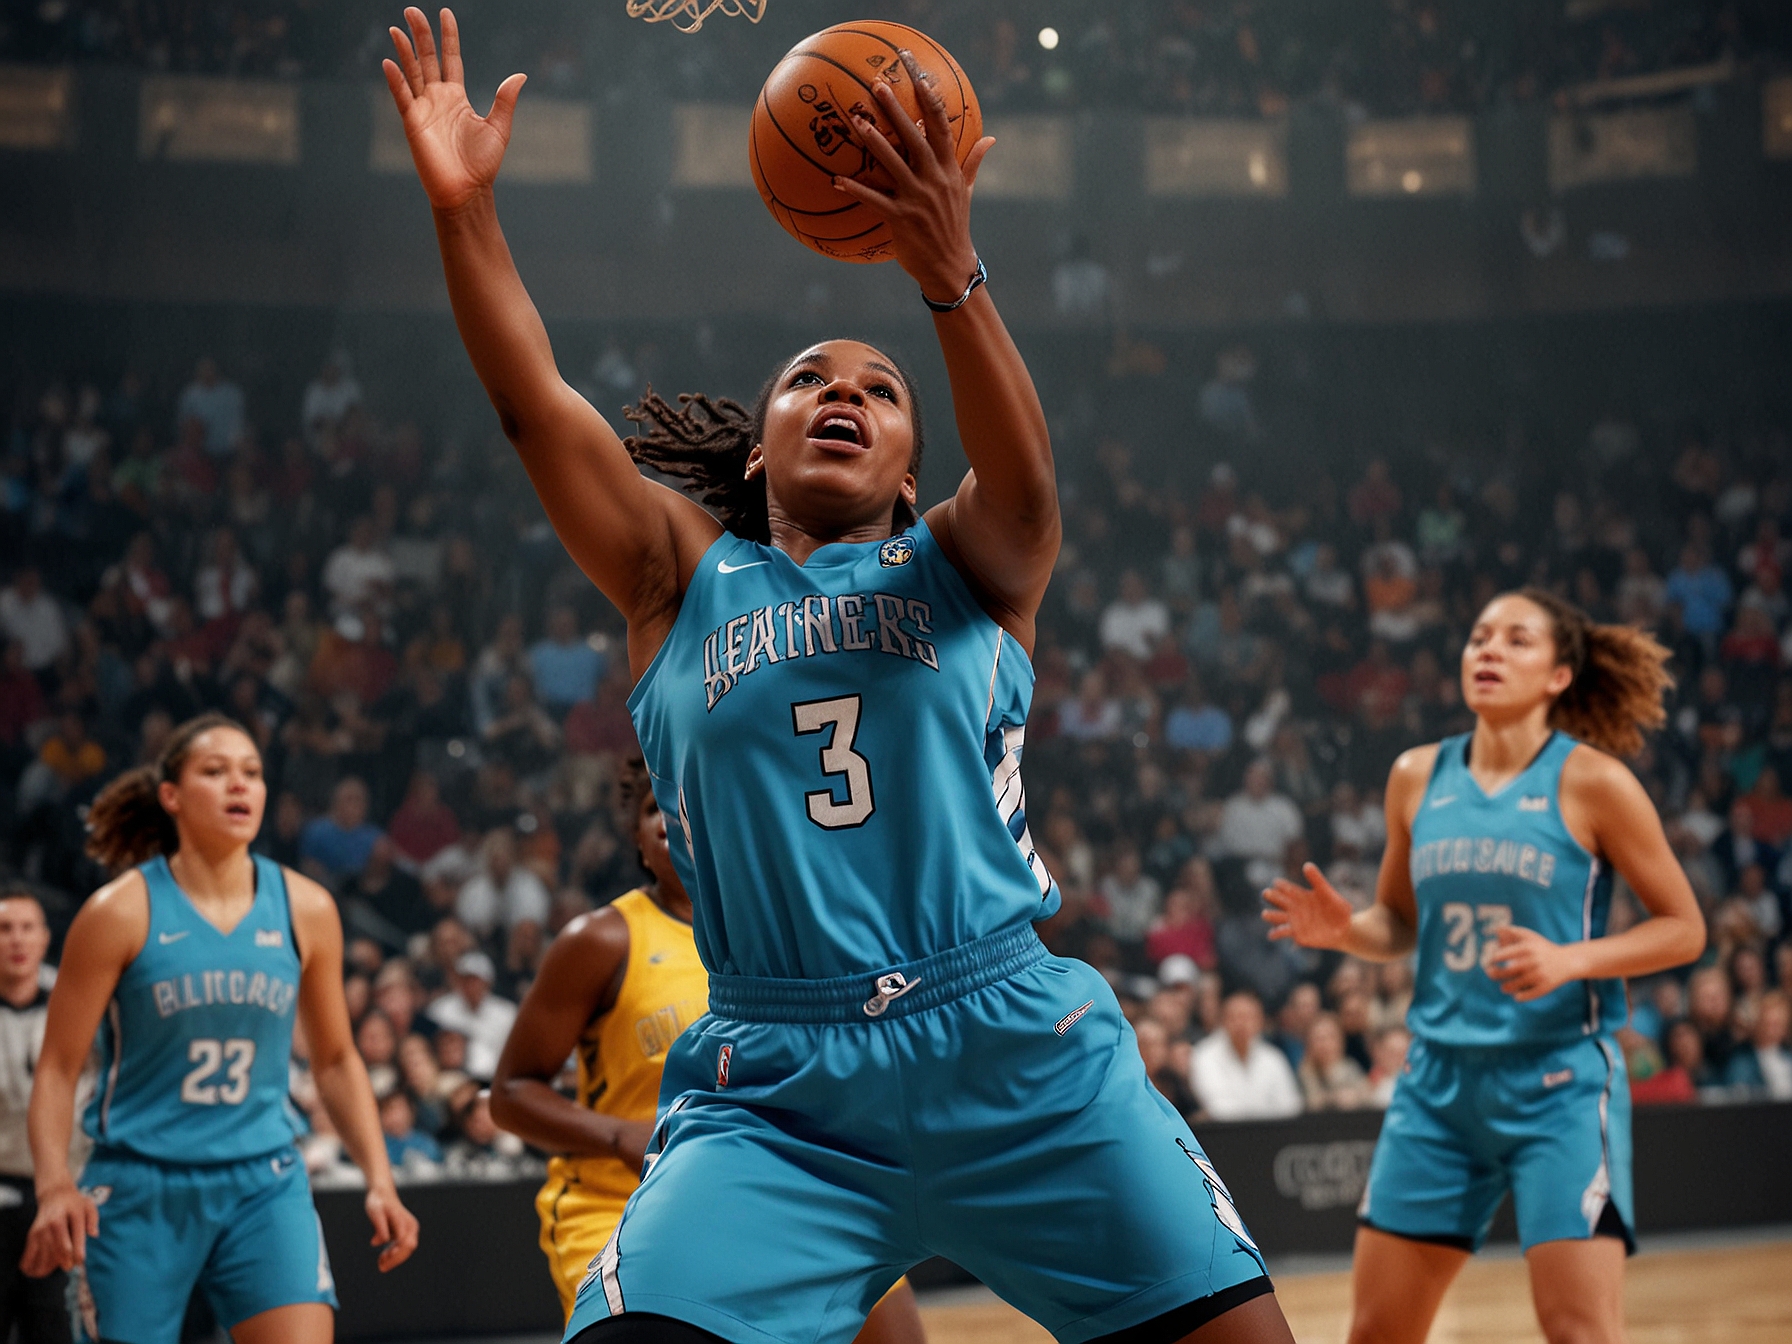 Angel Reese, in a Chicago Sky uniform, leaps high for a rebound during the game against the Dallas Wings, illustrating her dominant 18-rebound performance that helped her set the record.